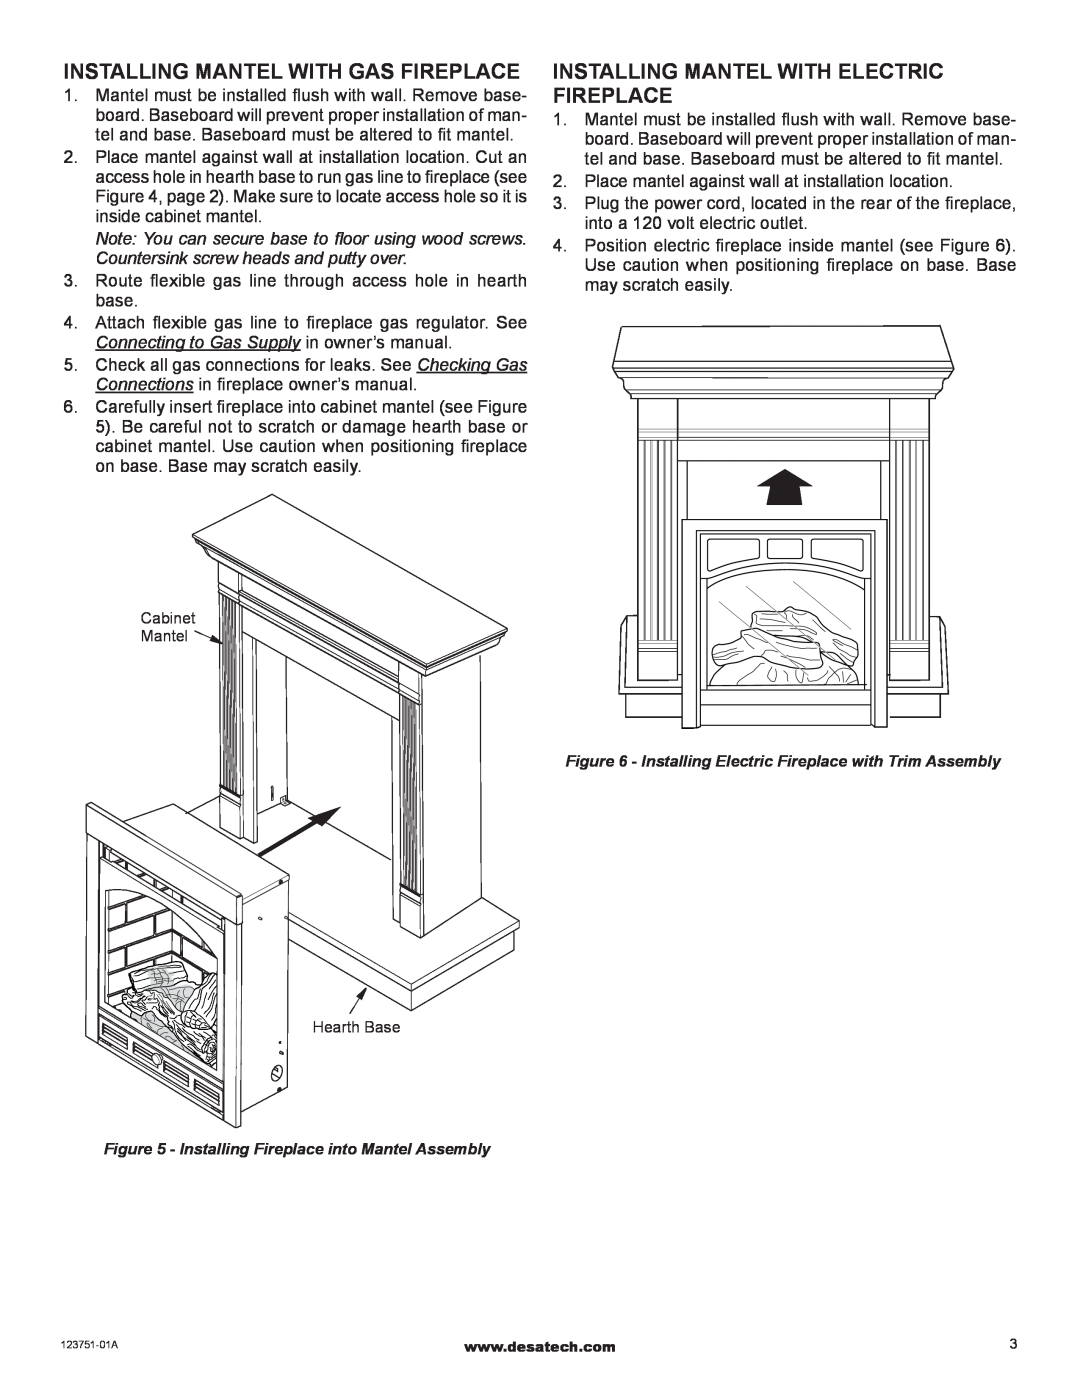 Desa W21TO Installing Mantel with GAS fireplace, Installing Mantel with electric fireplace, Cabinet Mantel, Hearth Base 